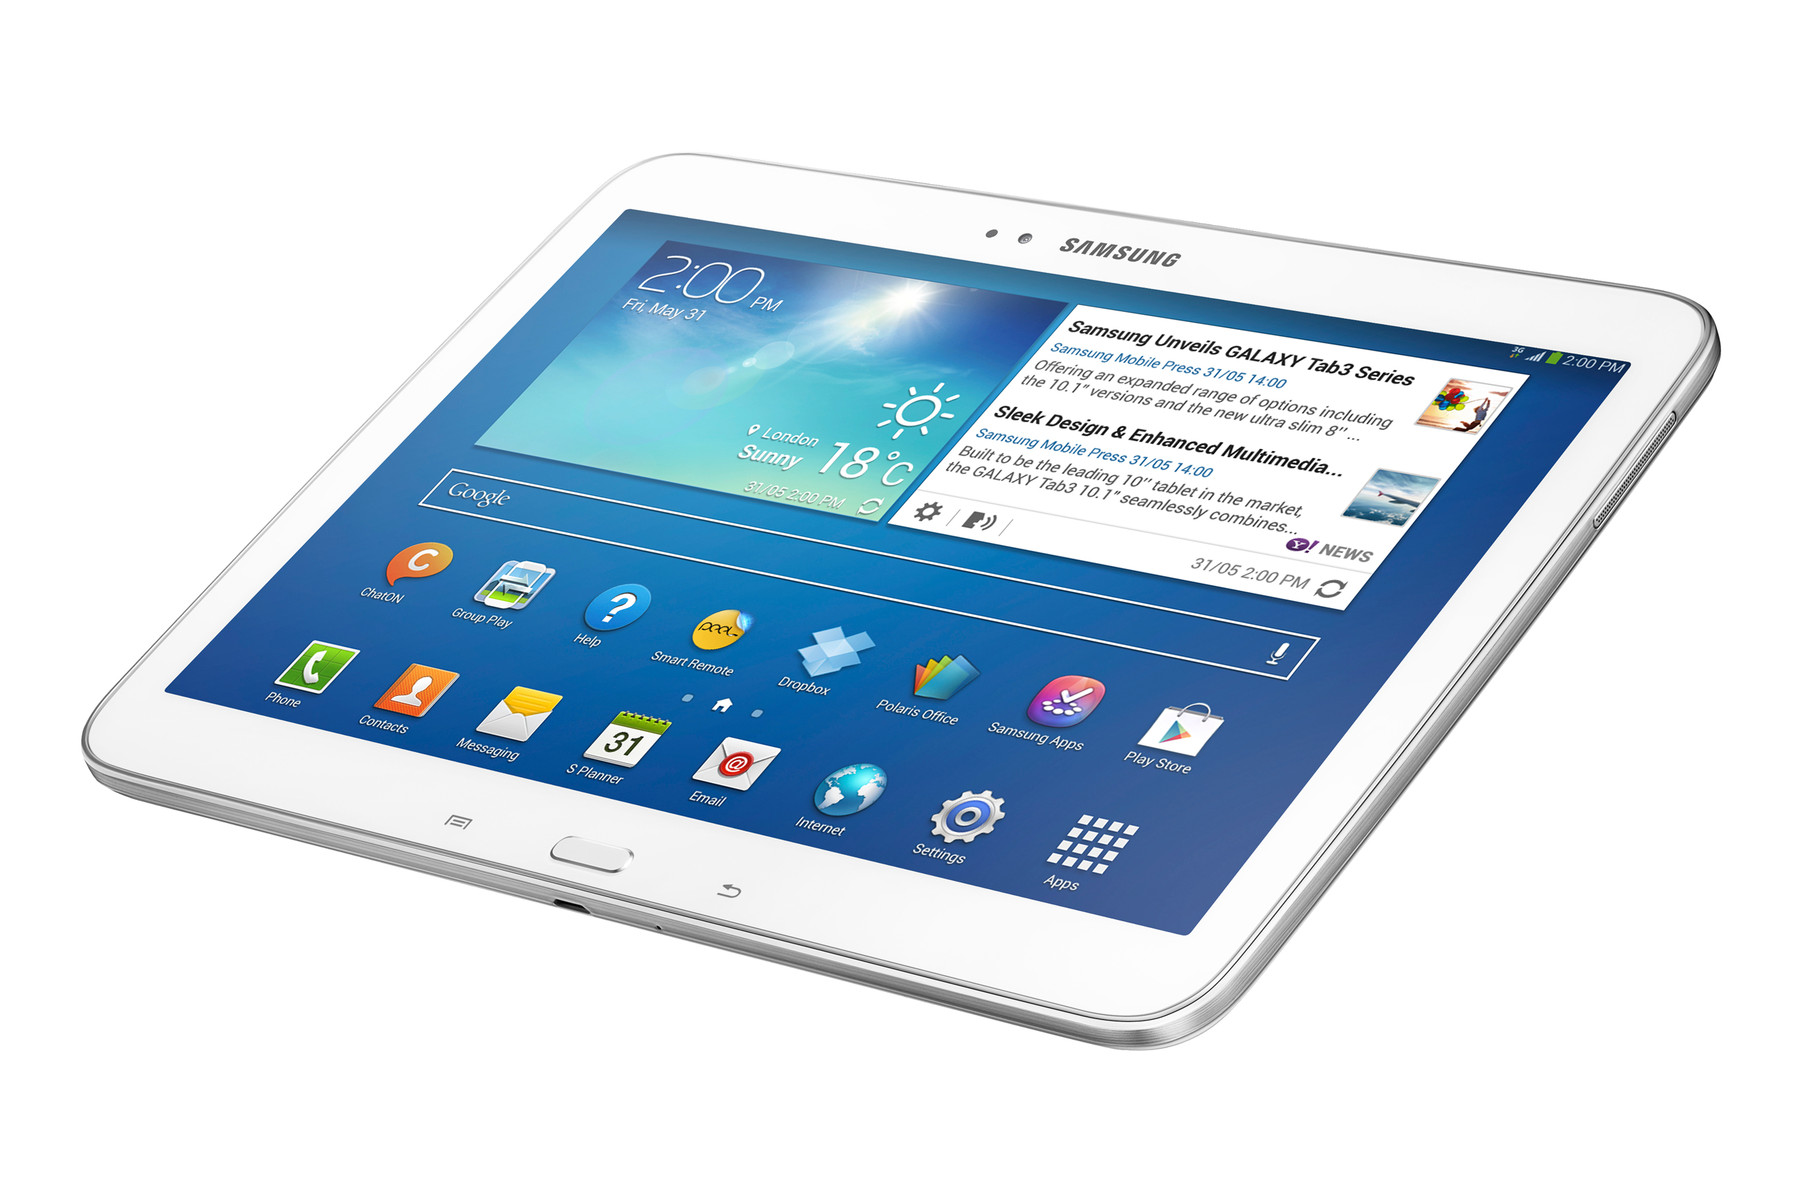 Review Samsung Galaxy Tab 3 10.1 Tablet - NotebookCheck.net Reviews